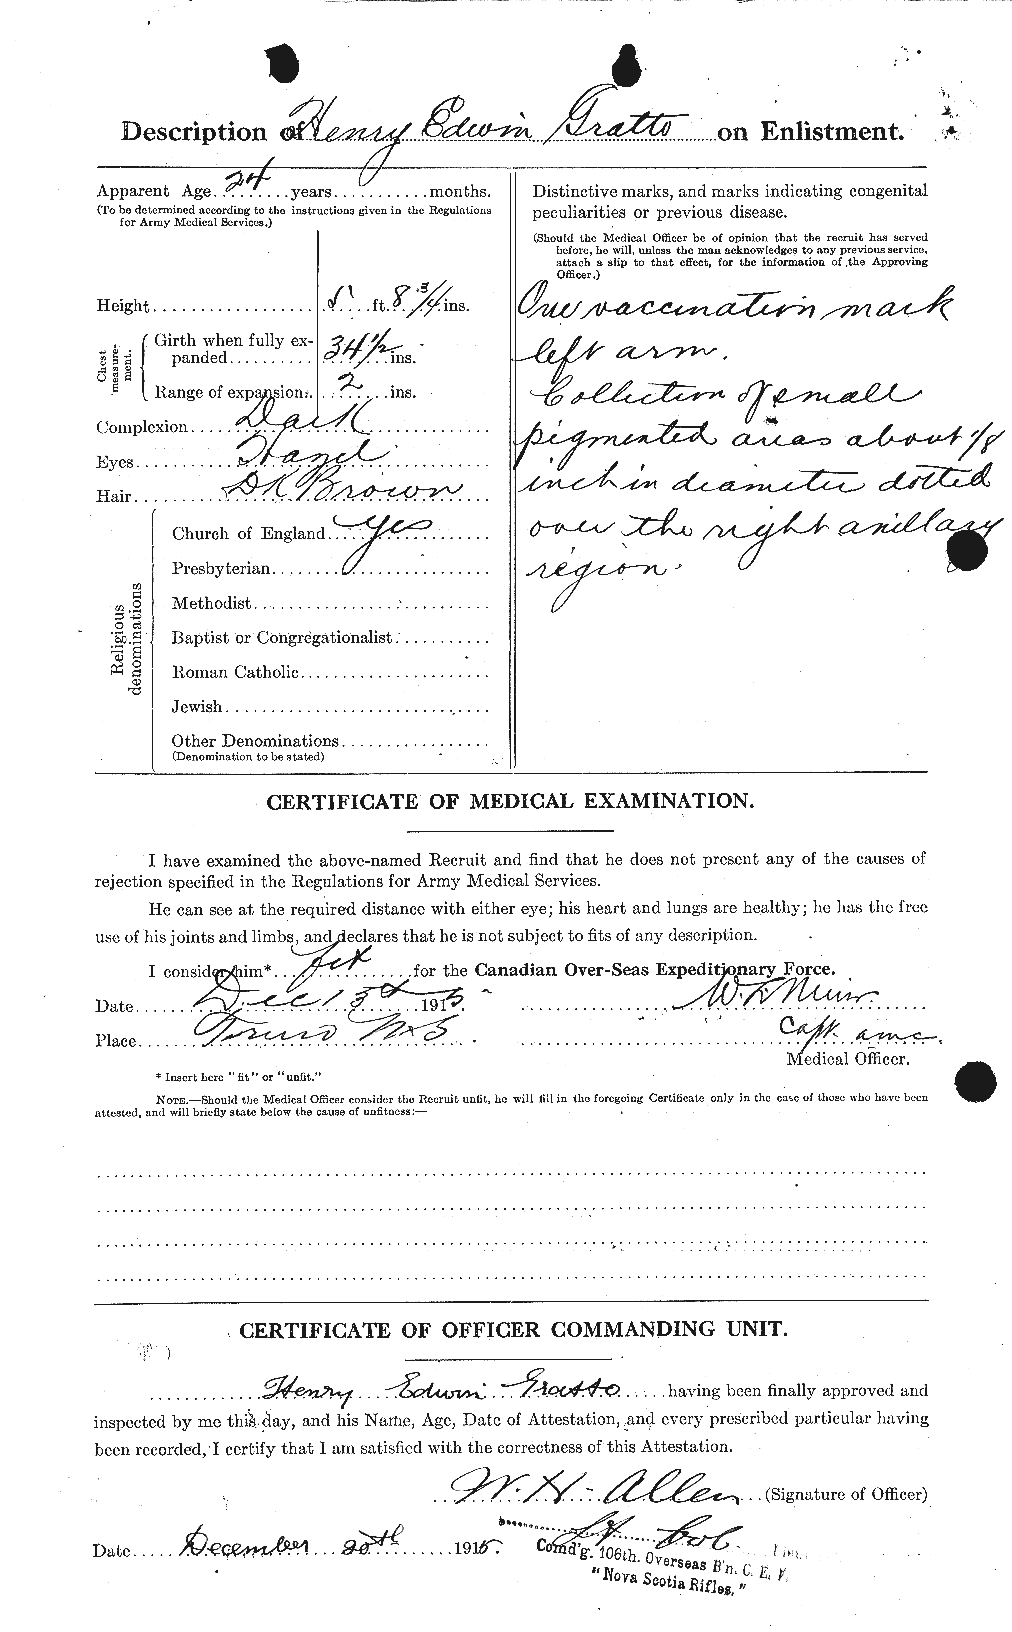 Personnel Records of the First World War - CEF 364529b